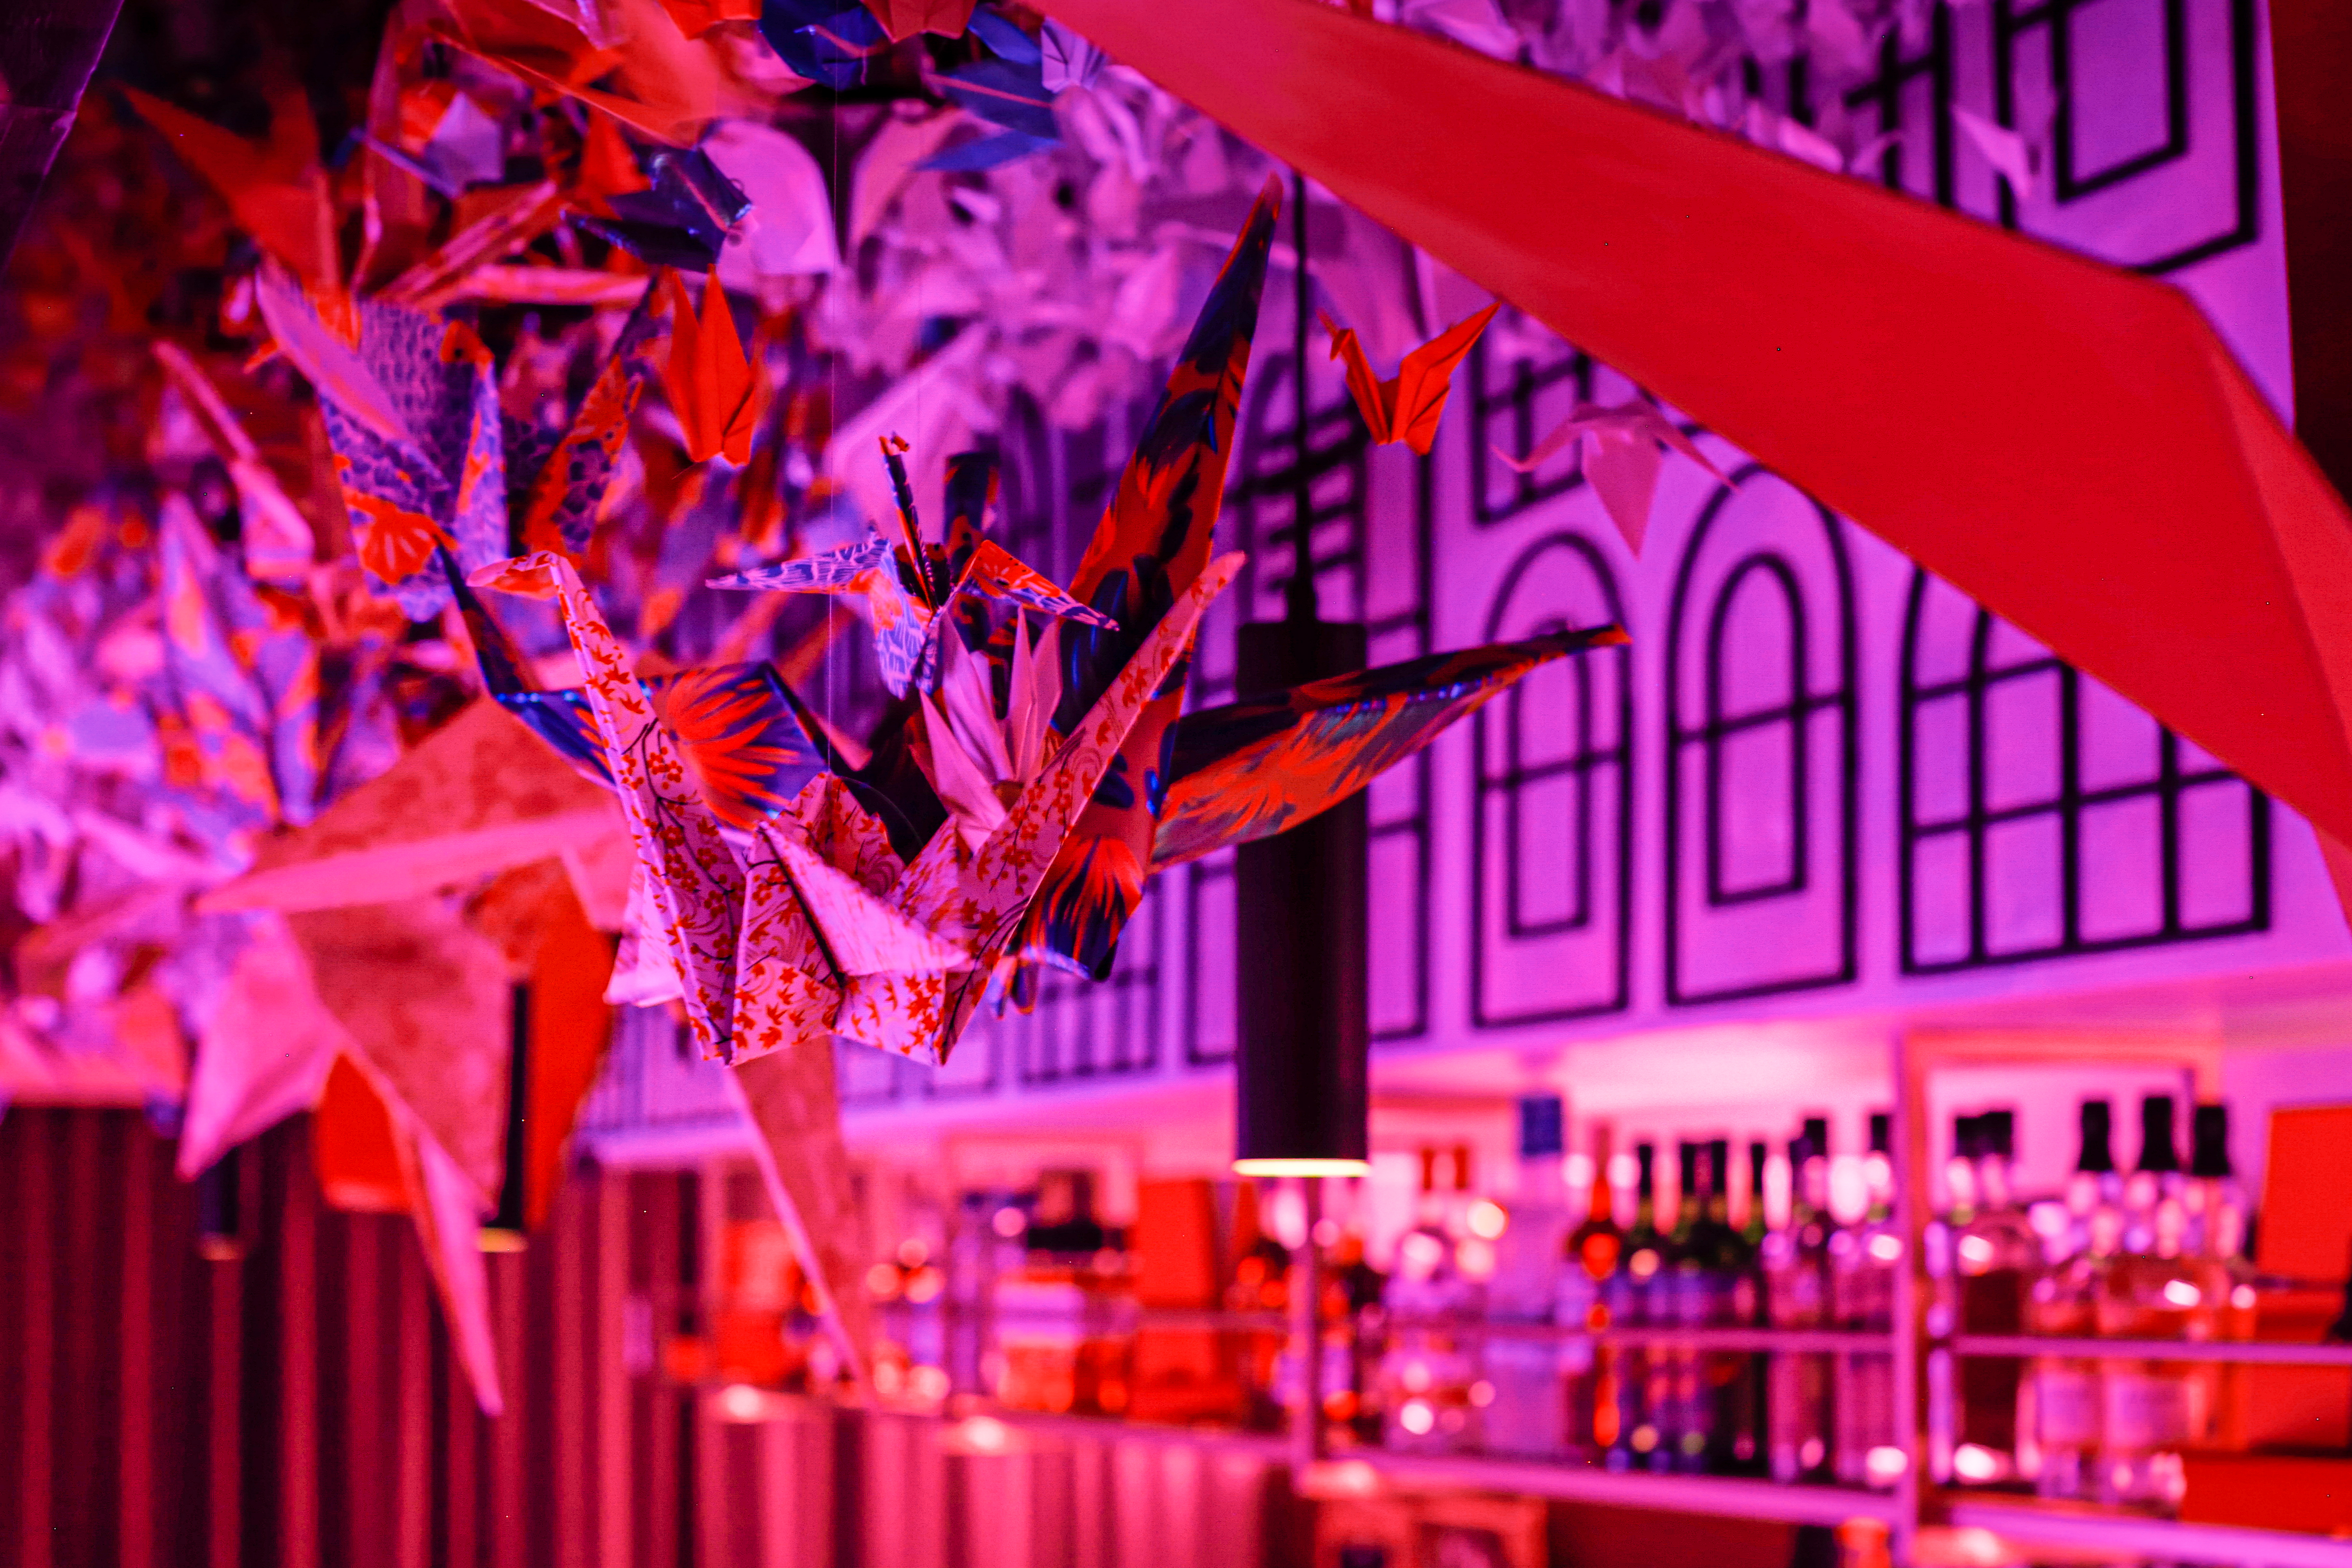 The ceiling of a Norigami’s hidden bar is decorated with origami cranes.